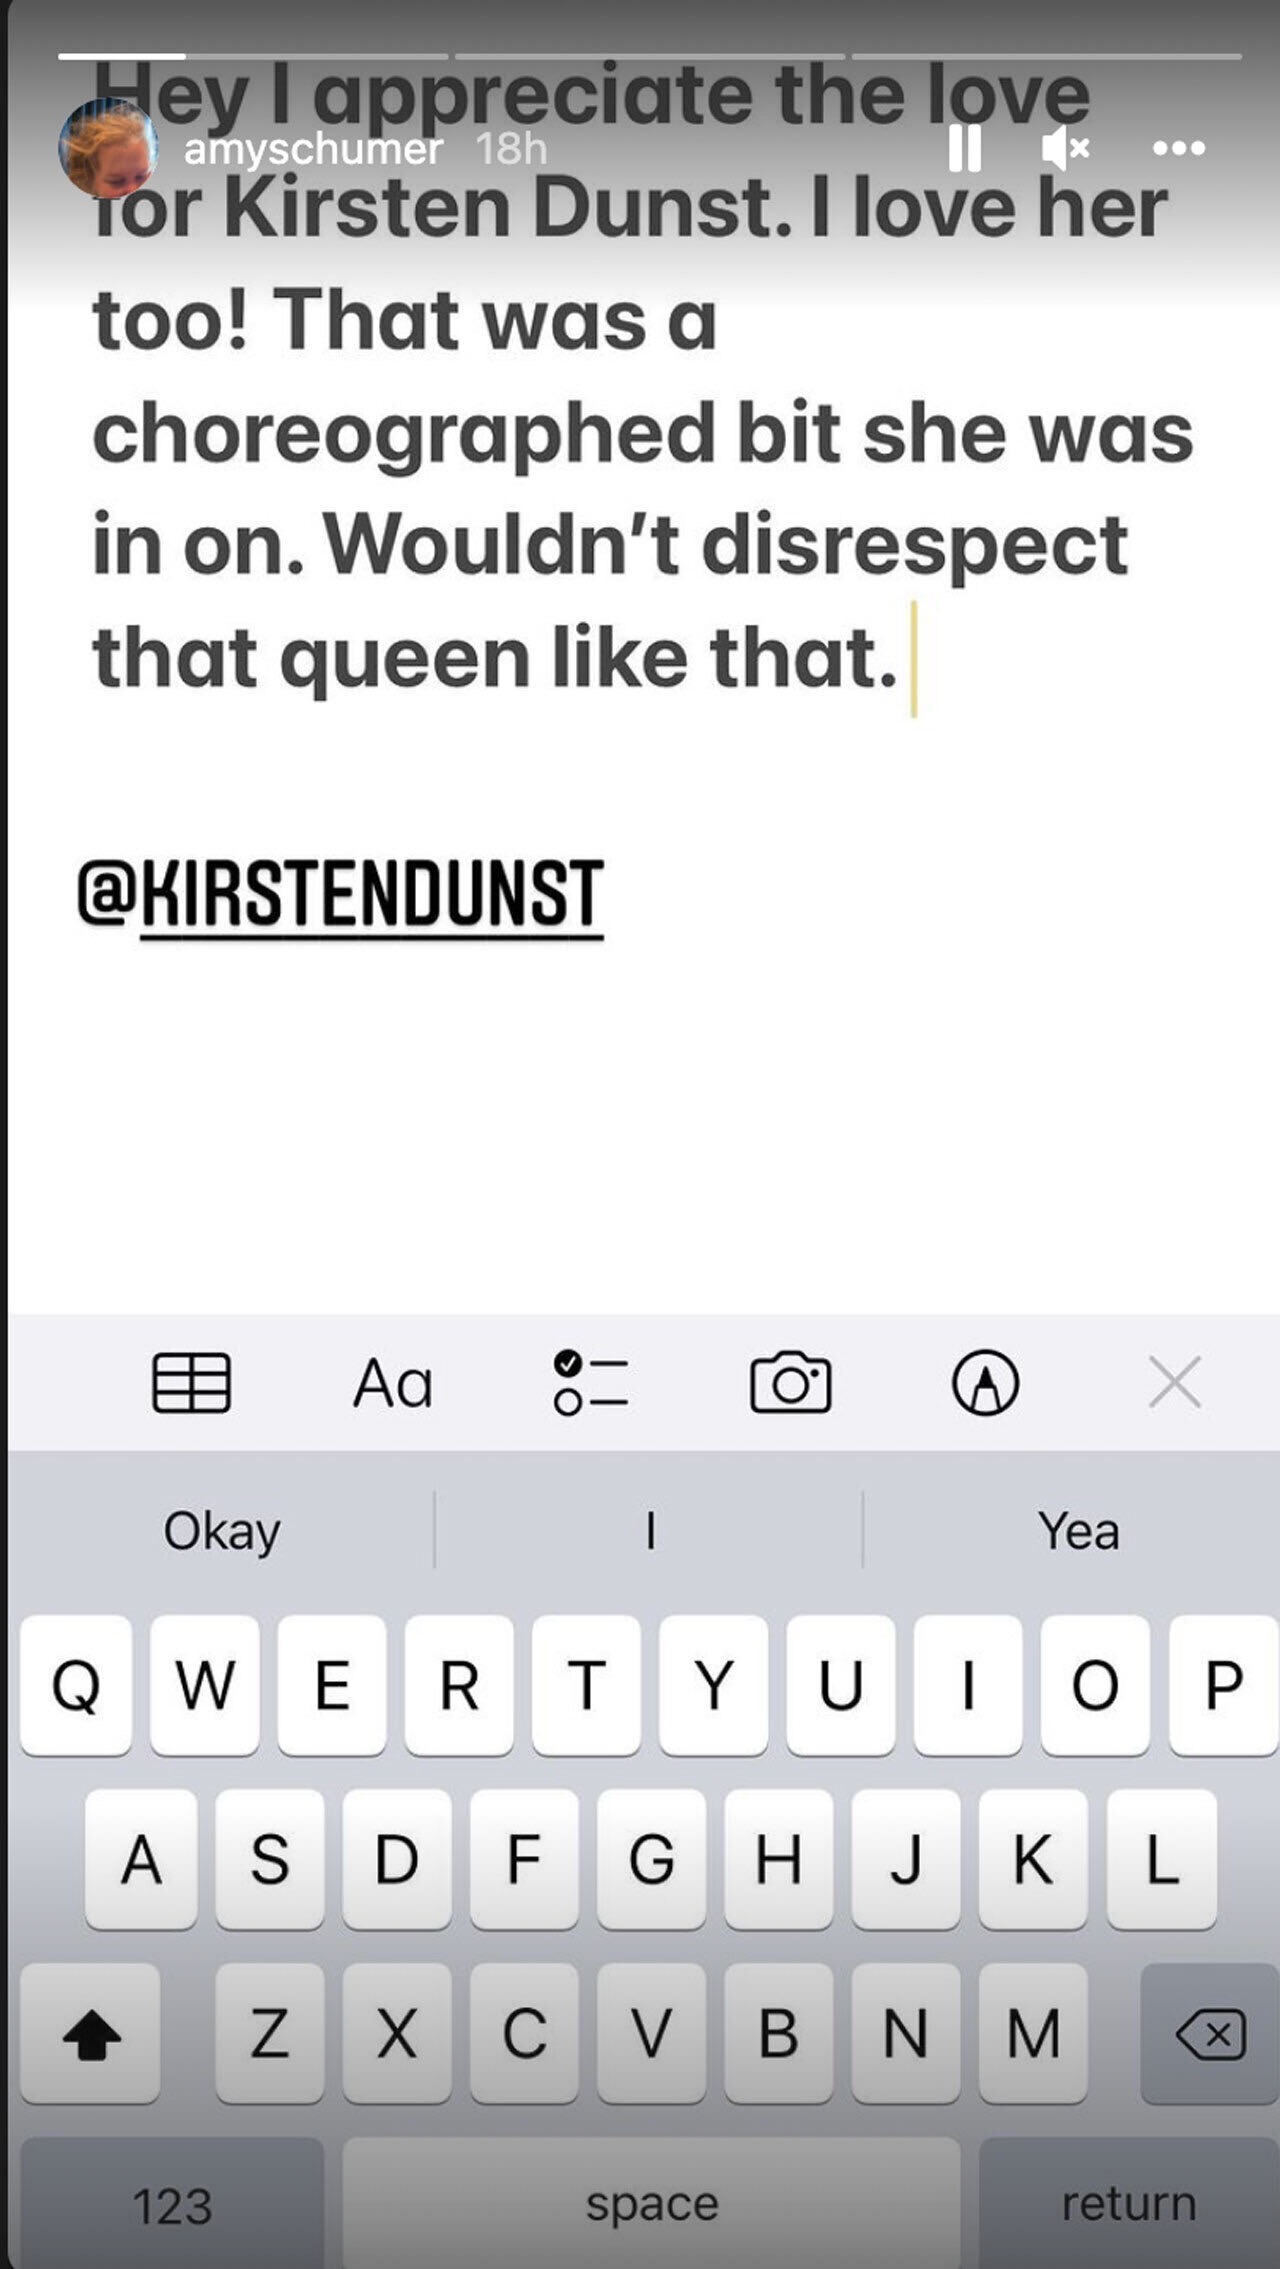 Instagram post of Amy Schumer tagging Kirsten Dunst in an Oscars explanation